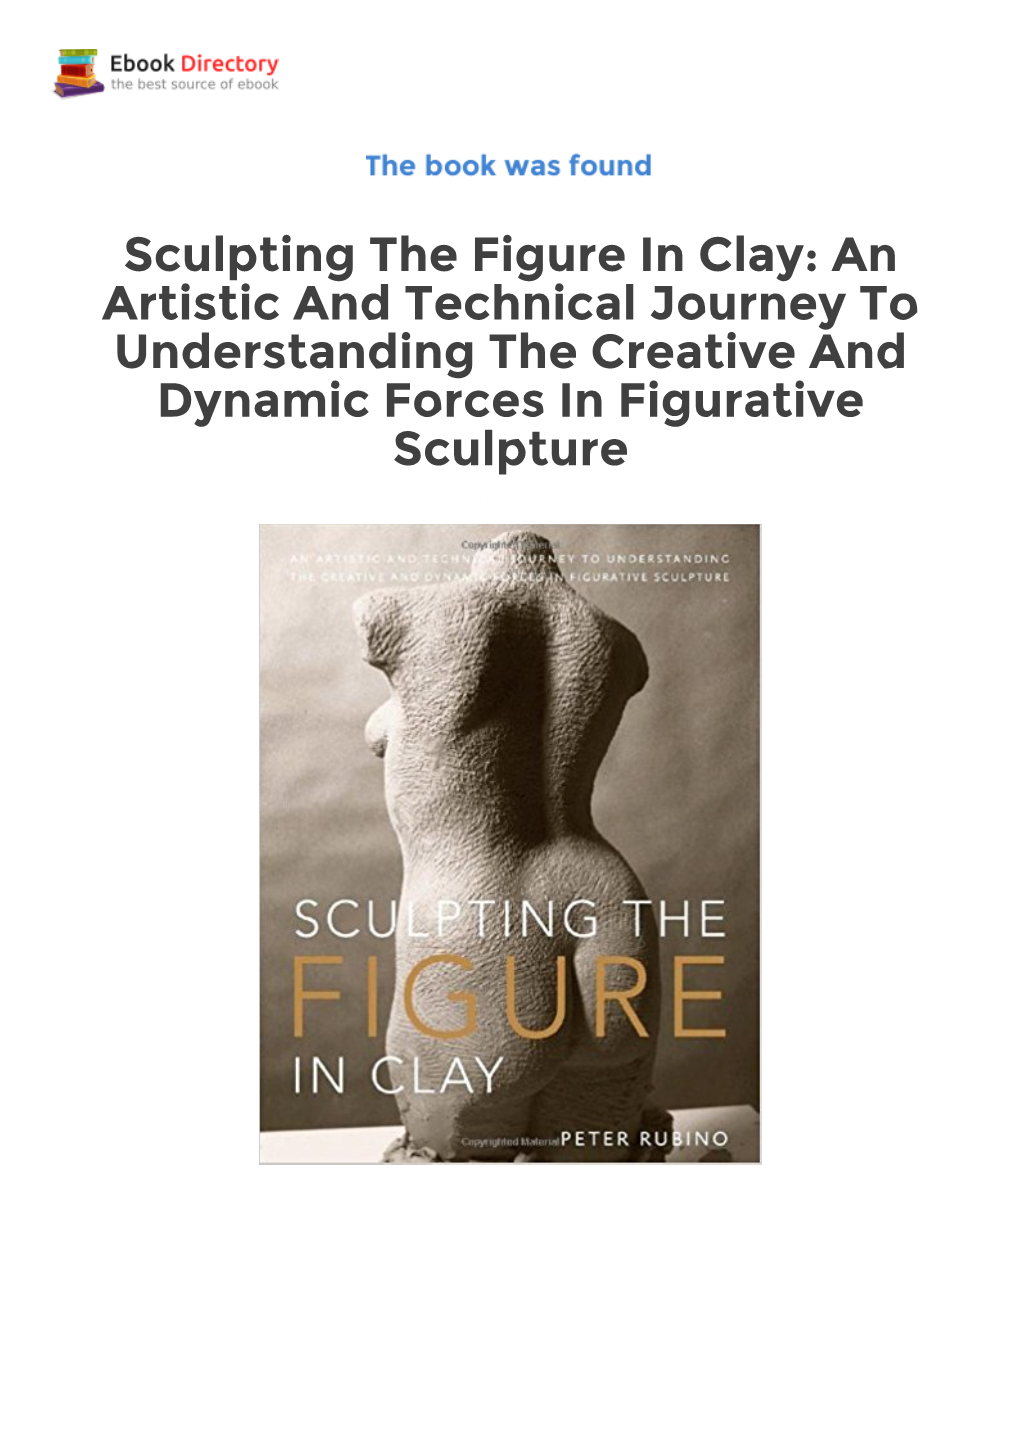 Sculpting the Figure in Clay: an Artistic and Technical Journey to Understanding the Creative and Dynamic Forces in Figurative Sculpture Online Ebook Download